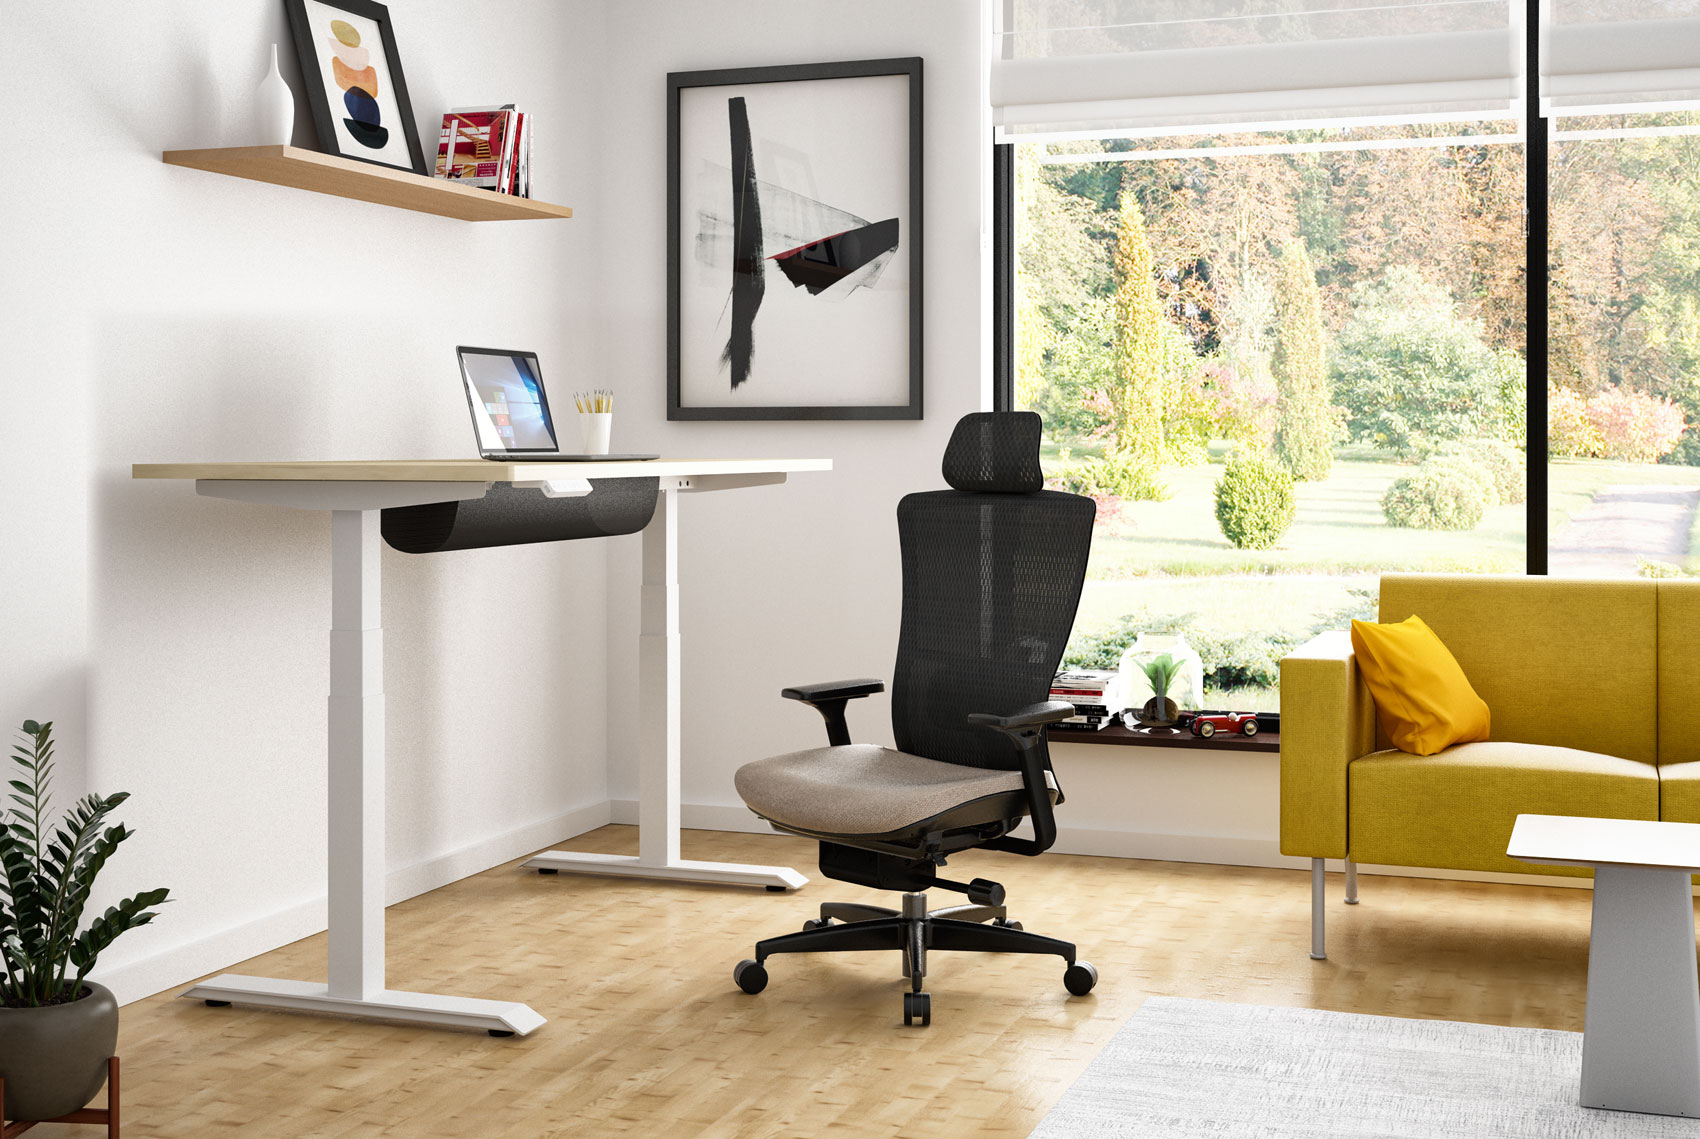 Vertigo Ez height adjustable table in white finish with a Soul V2 office chair and a yellow Virtu SV sofa